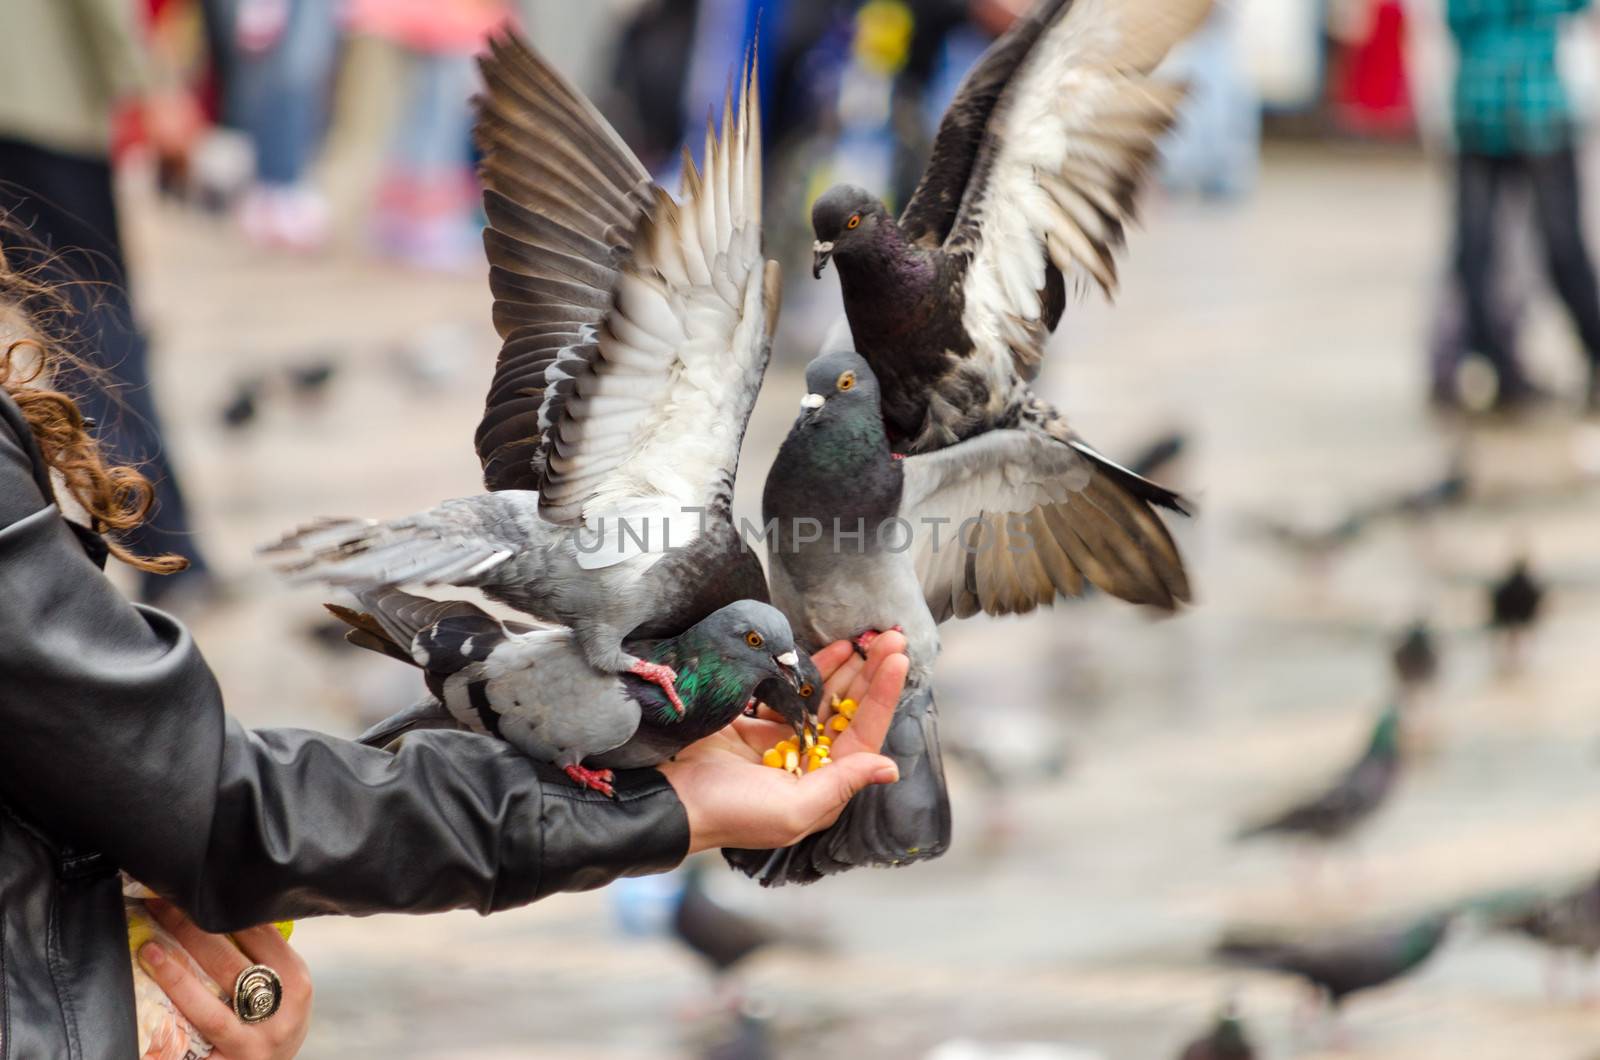 Pigeons flocking to eat corn from a hand in the Plaza de Bolivar in Bogota, Colombia